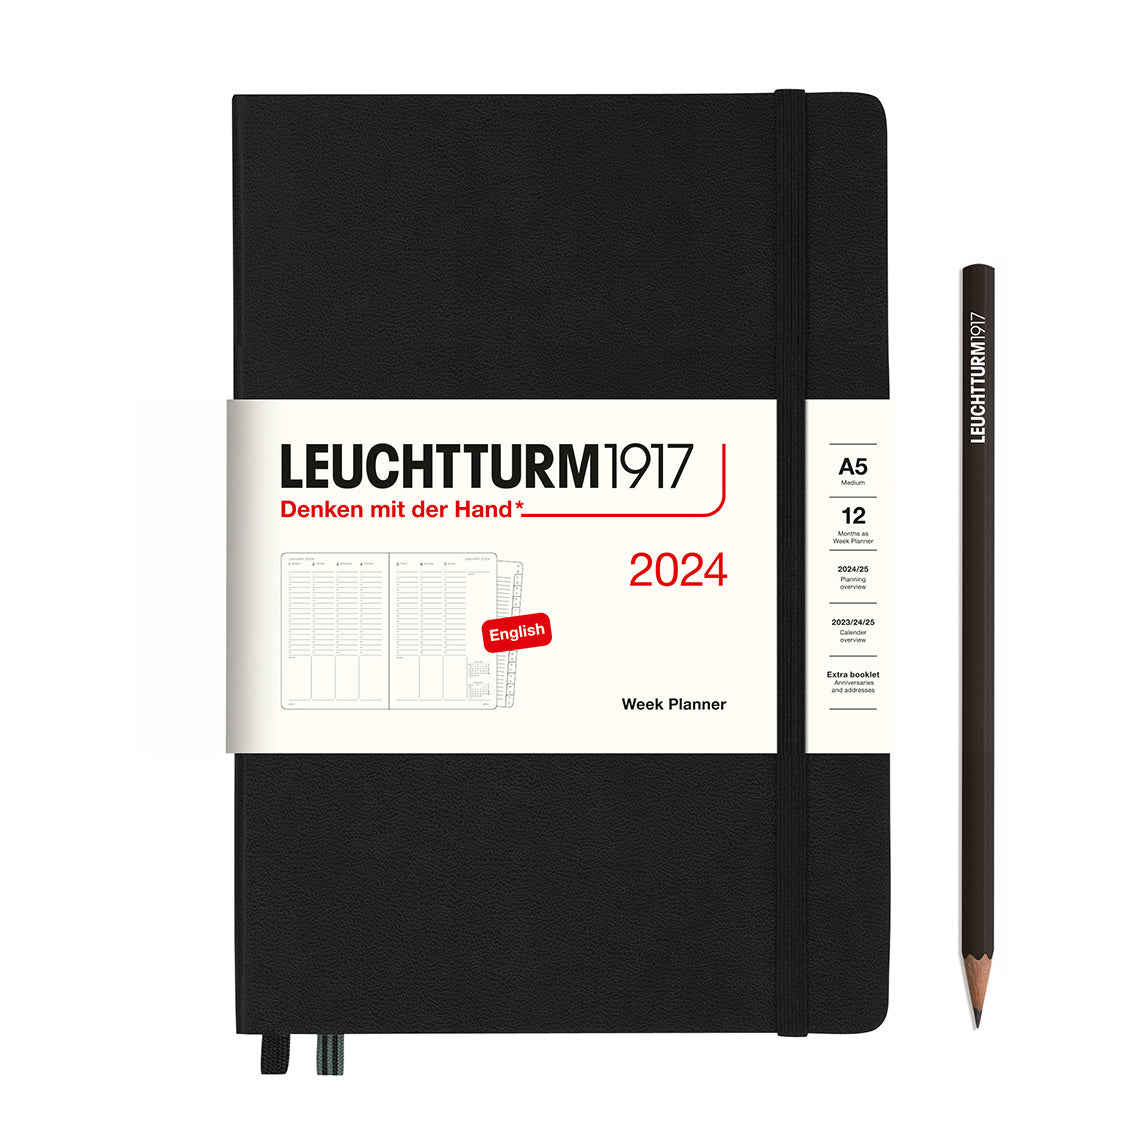 An image of a black planner with a black elastic band holding it together and a cream paper wrap around the middle stating the business name Leuchtturm1917, that it is for the year 2024, it is a week planner, is A5 in size and an English language version. It has an image on the wrap showing the inside layout which is a week across 2 pages set out as appointments. A black pencil is shown at the side of the planner.